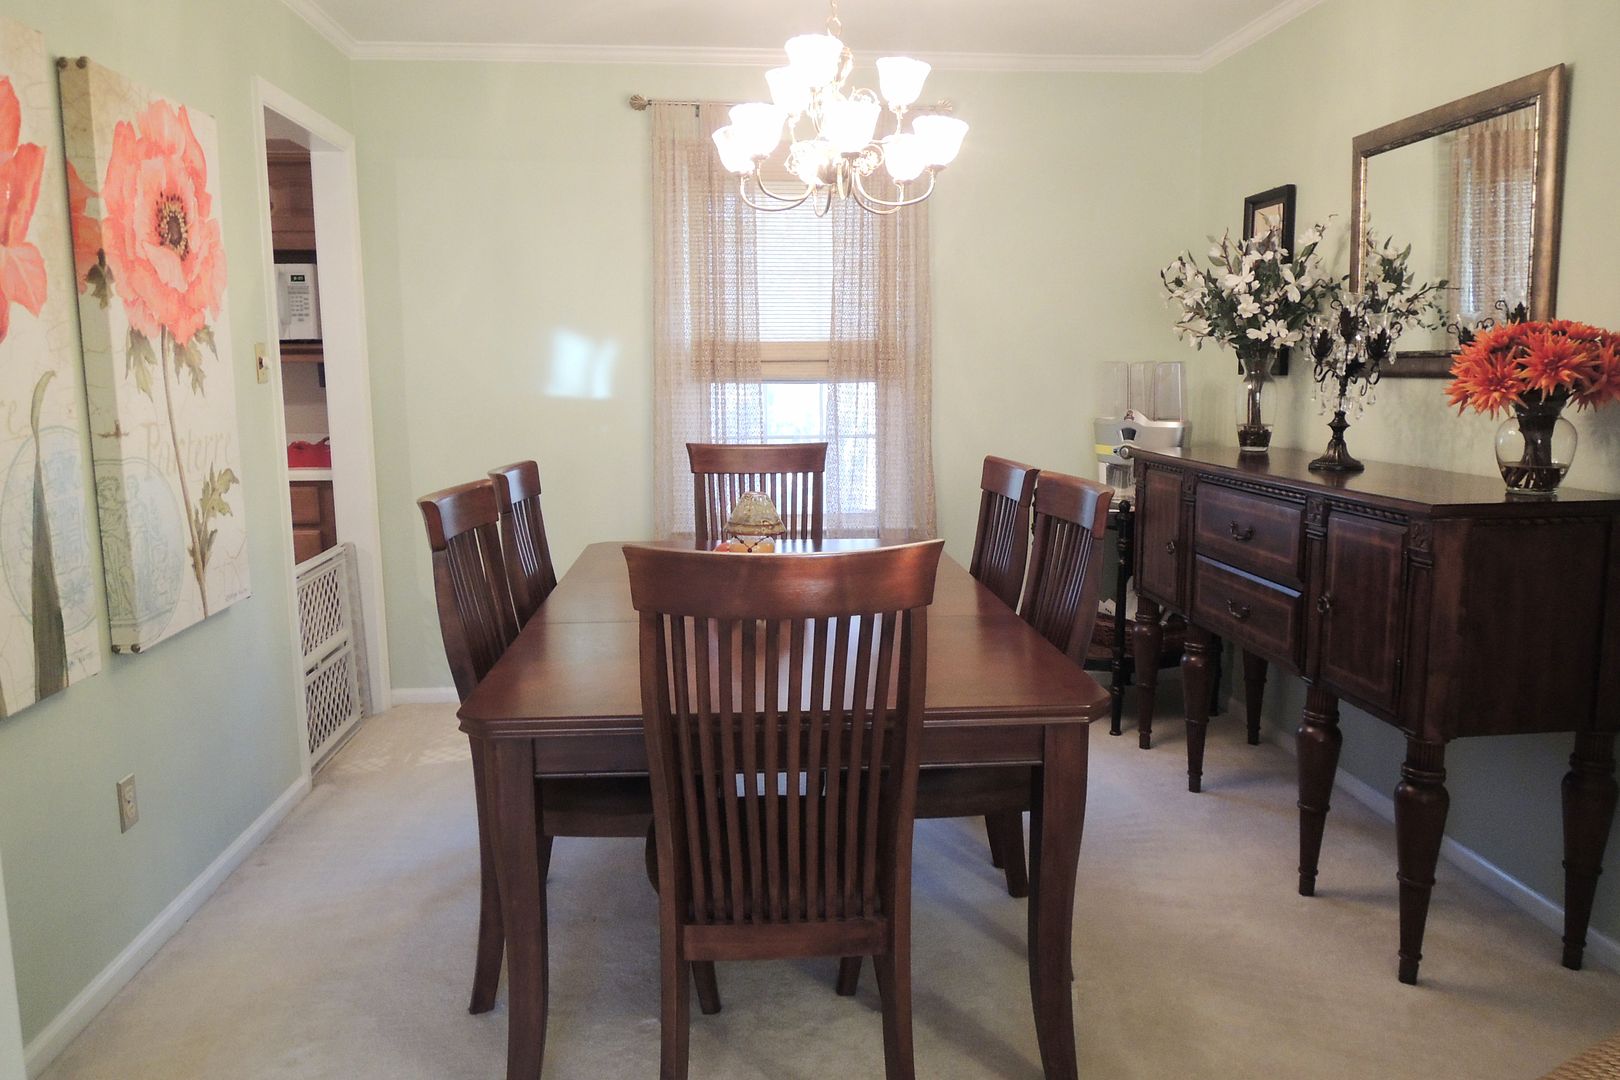 Formal Dining Room in Meticulously Maintained La Plata MD Home for Sale by Marie Lally of O'Brien Realty of Southern Maryland.  